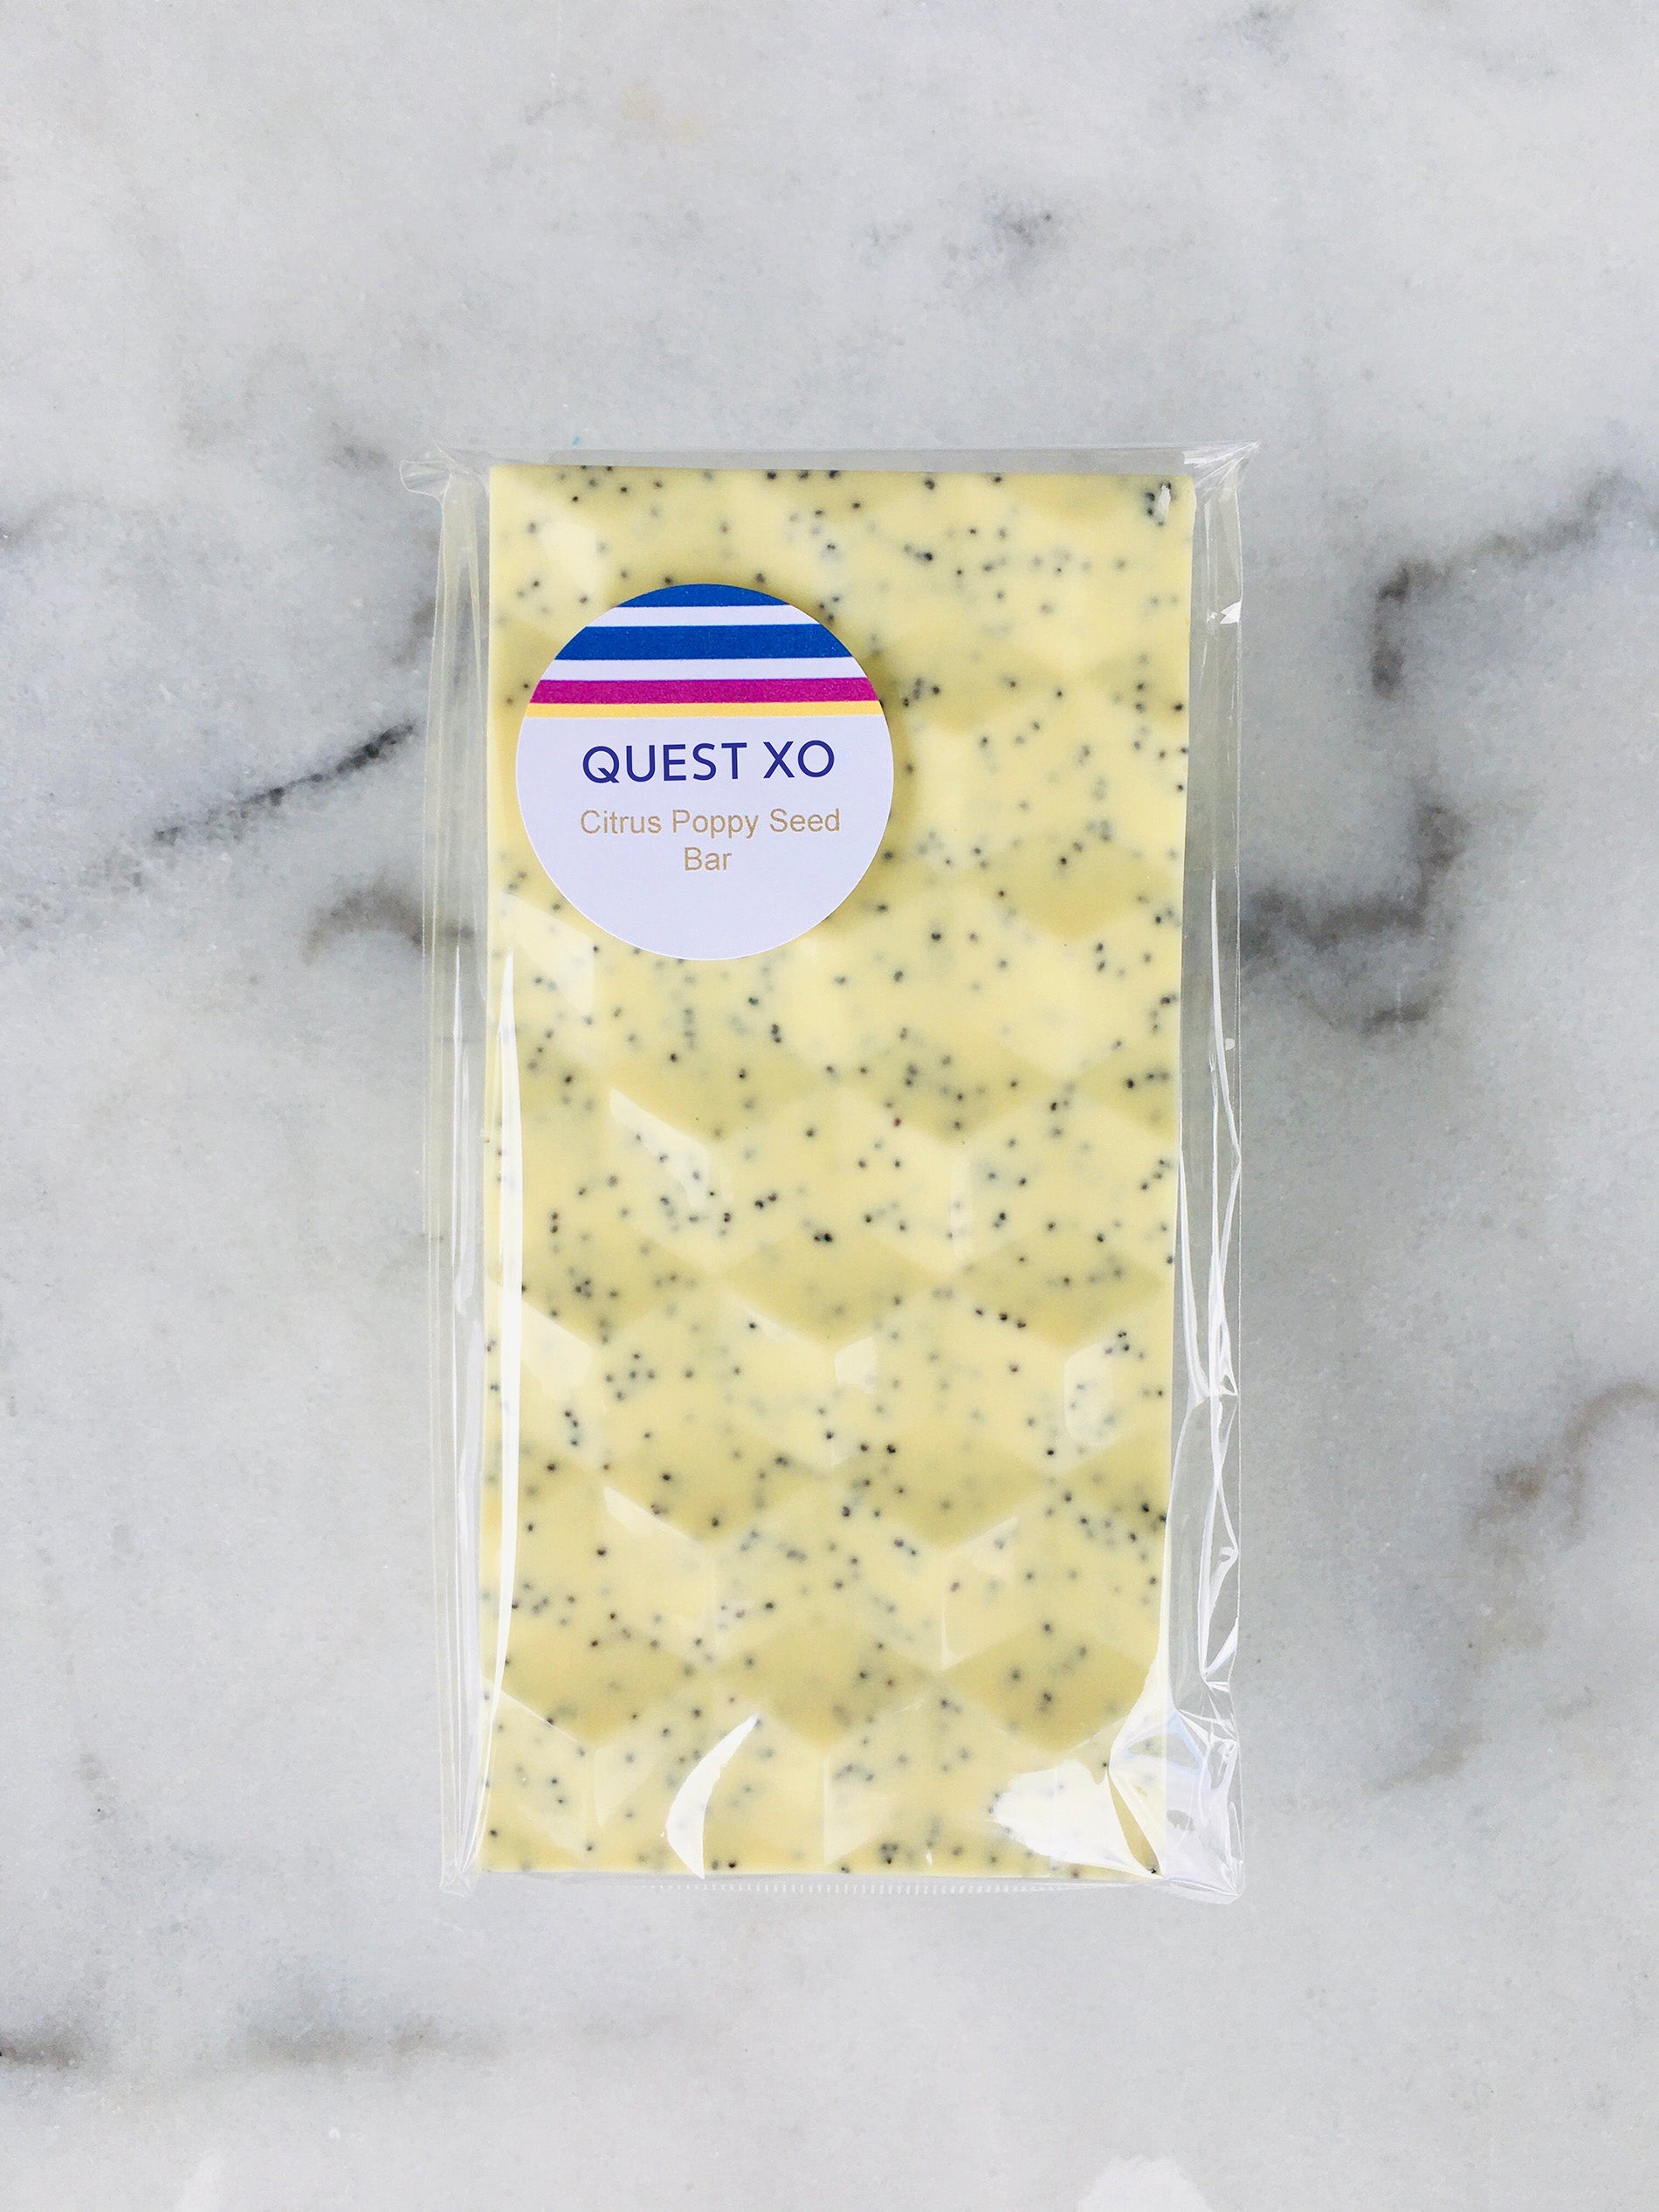 QUEST XO Citrus Poppy Seed Bar: White chocolate bar packed in transparent packing with QUEST XO logo placed on a marble background.